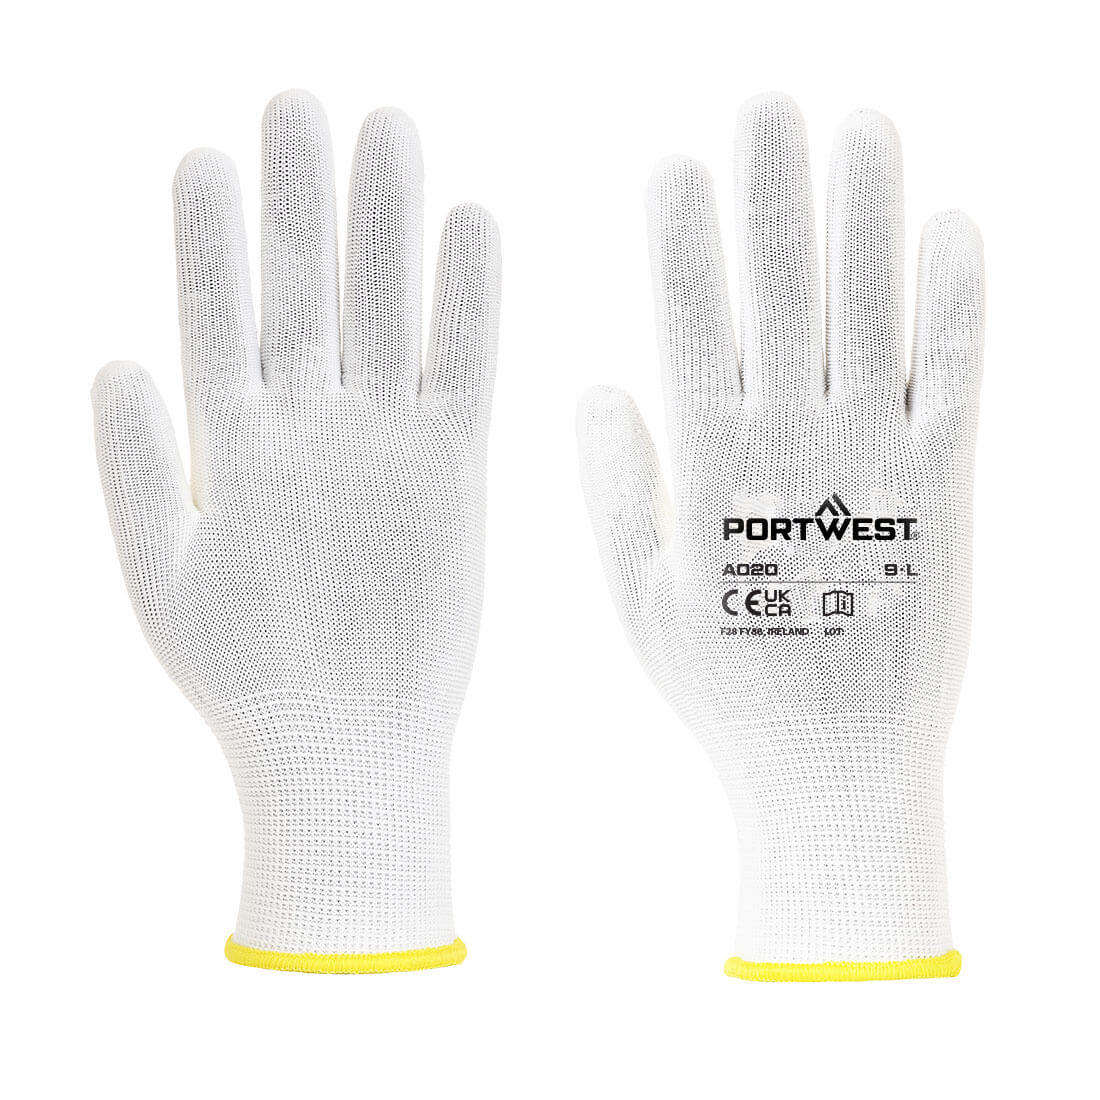 Portwest Assembly Glove (960 pairs) (A020)